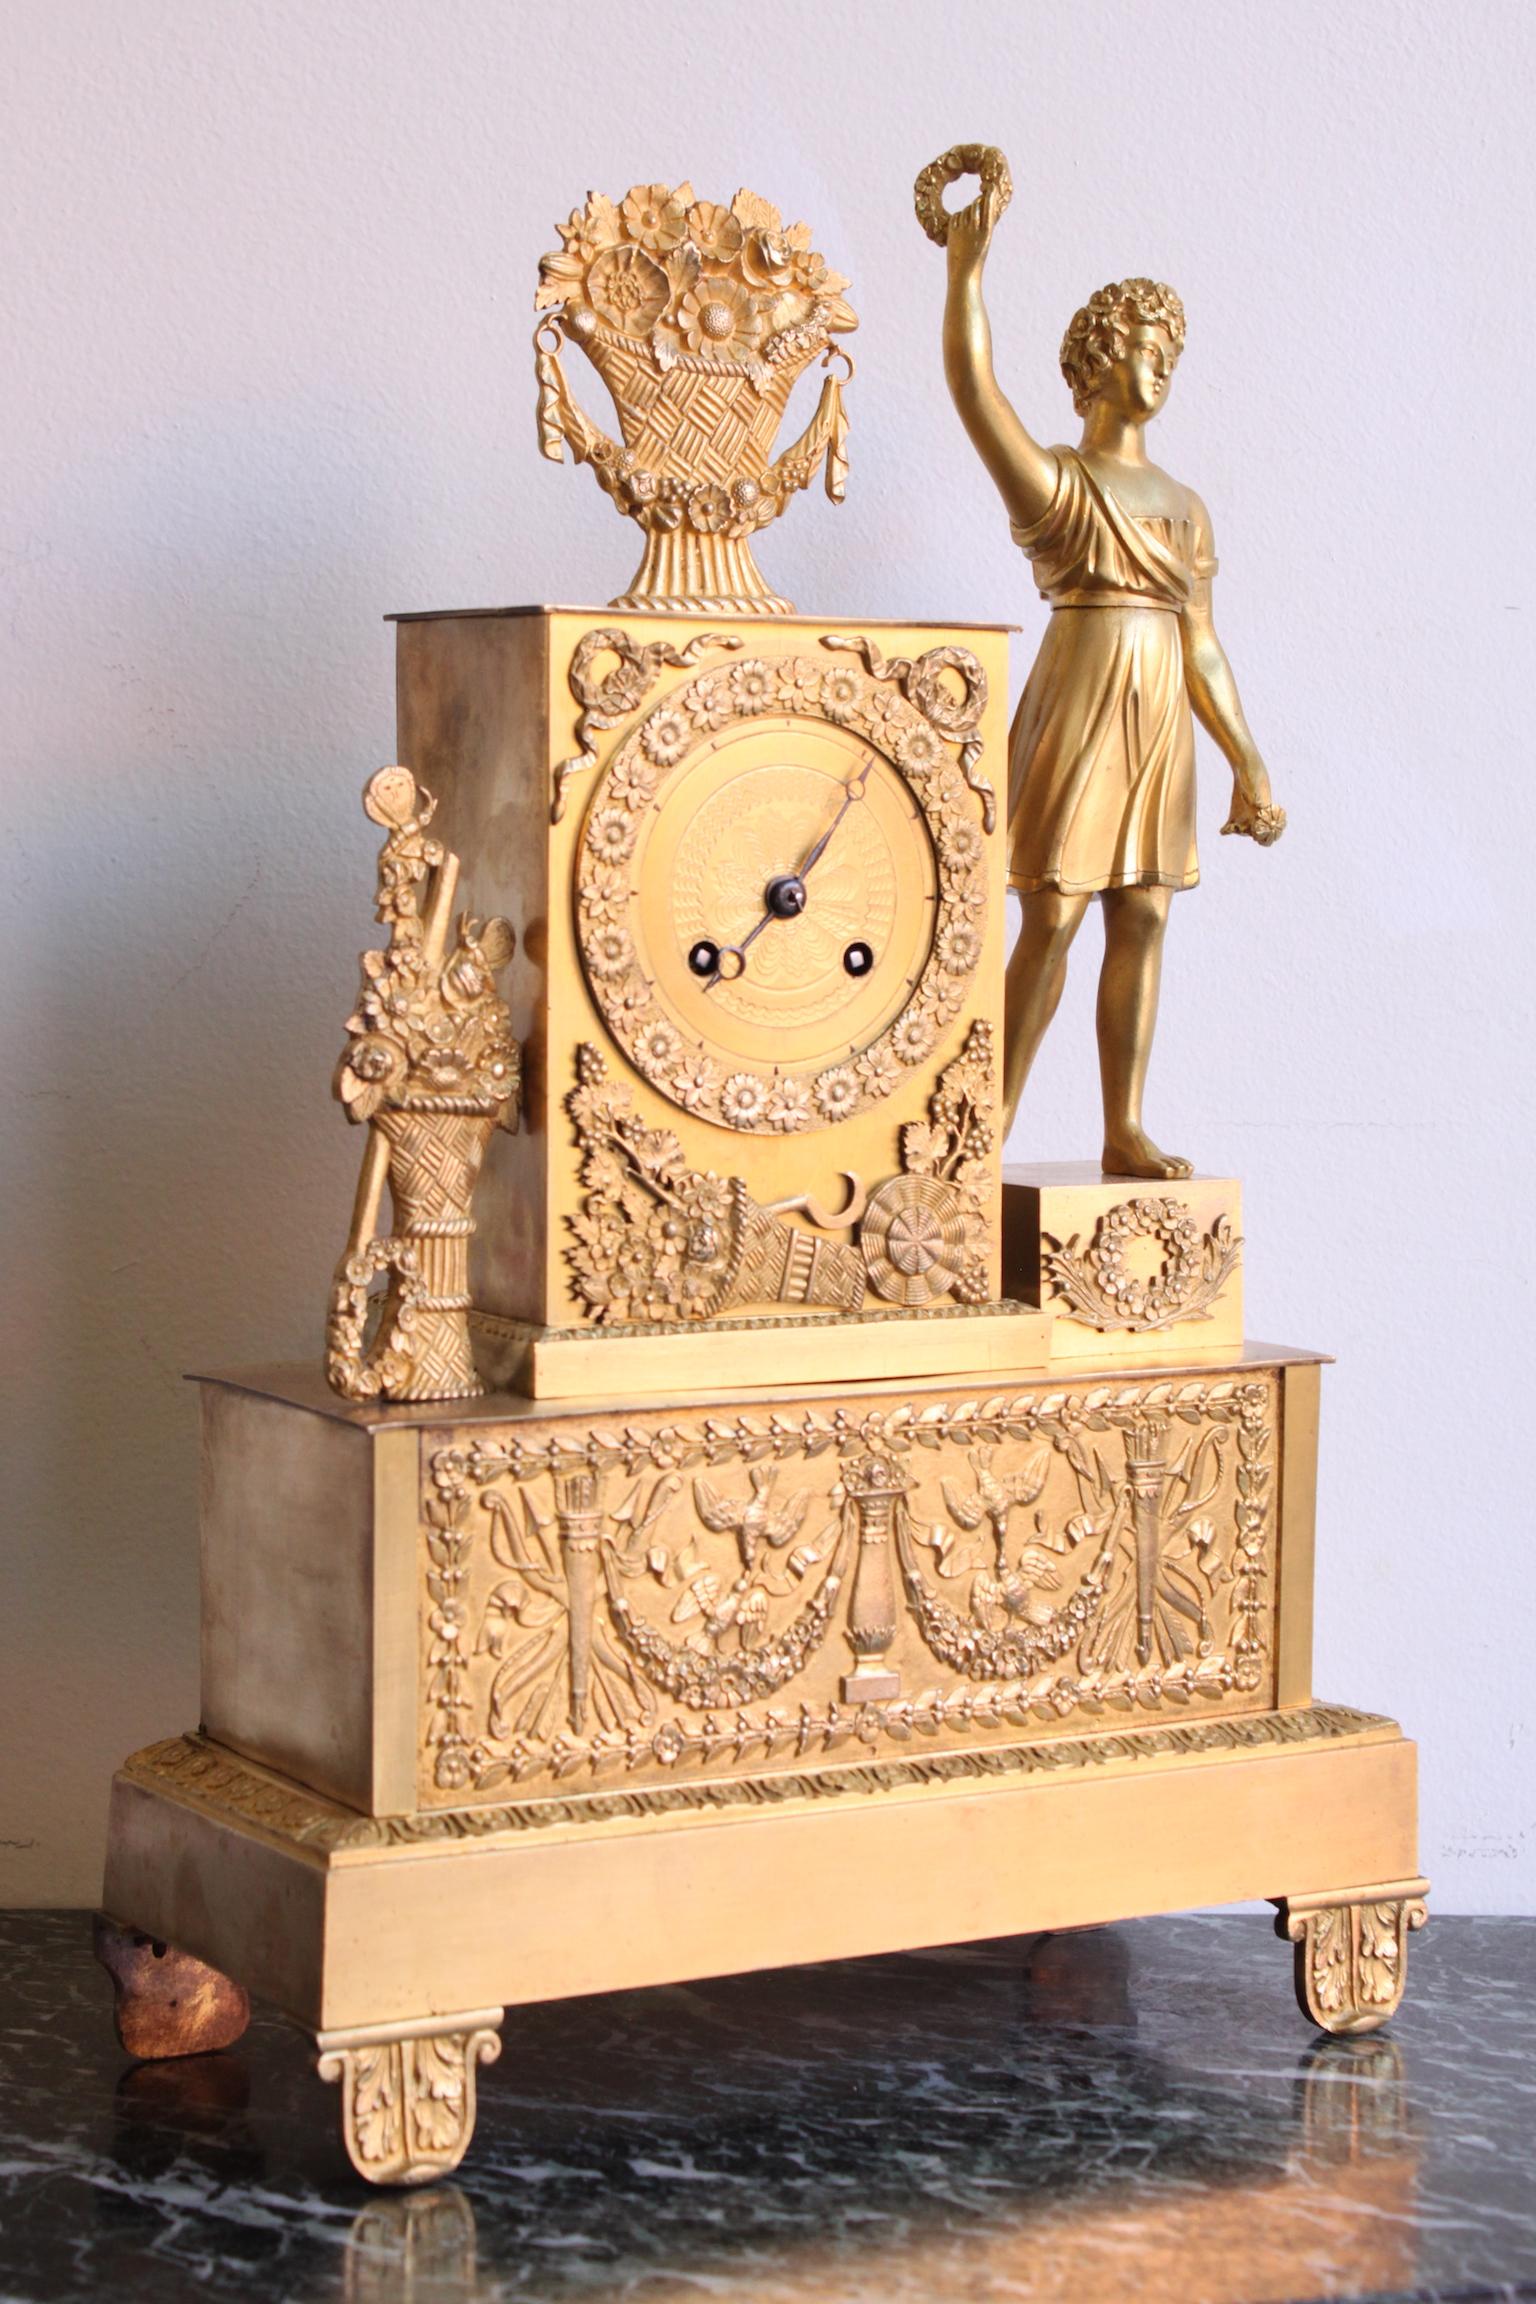 19th century French Restauration clock, decorated with a man holding a laurel wreath. Gilding from the time. 
Dimensions: Width 25cm, depth 10cm, height 39cm.